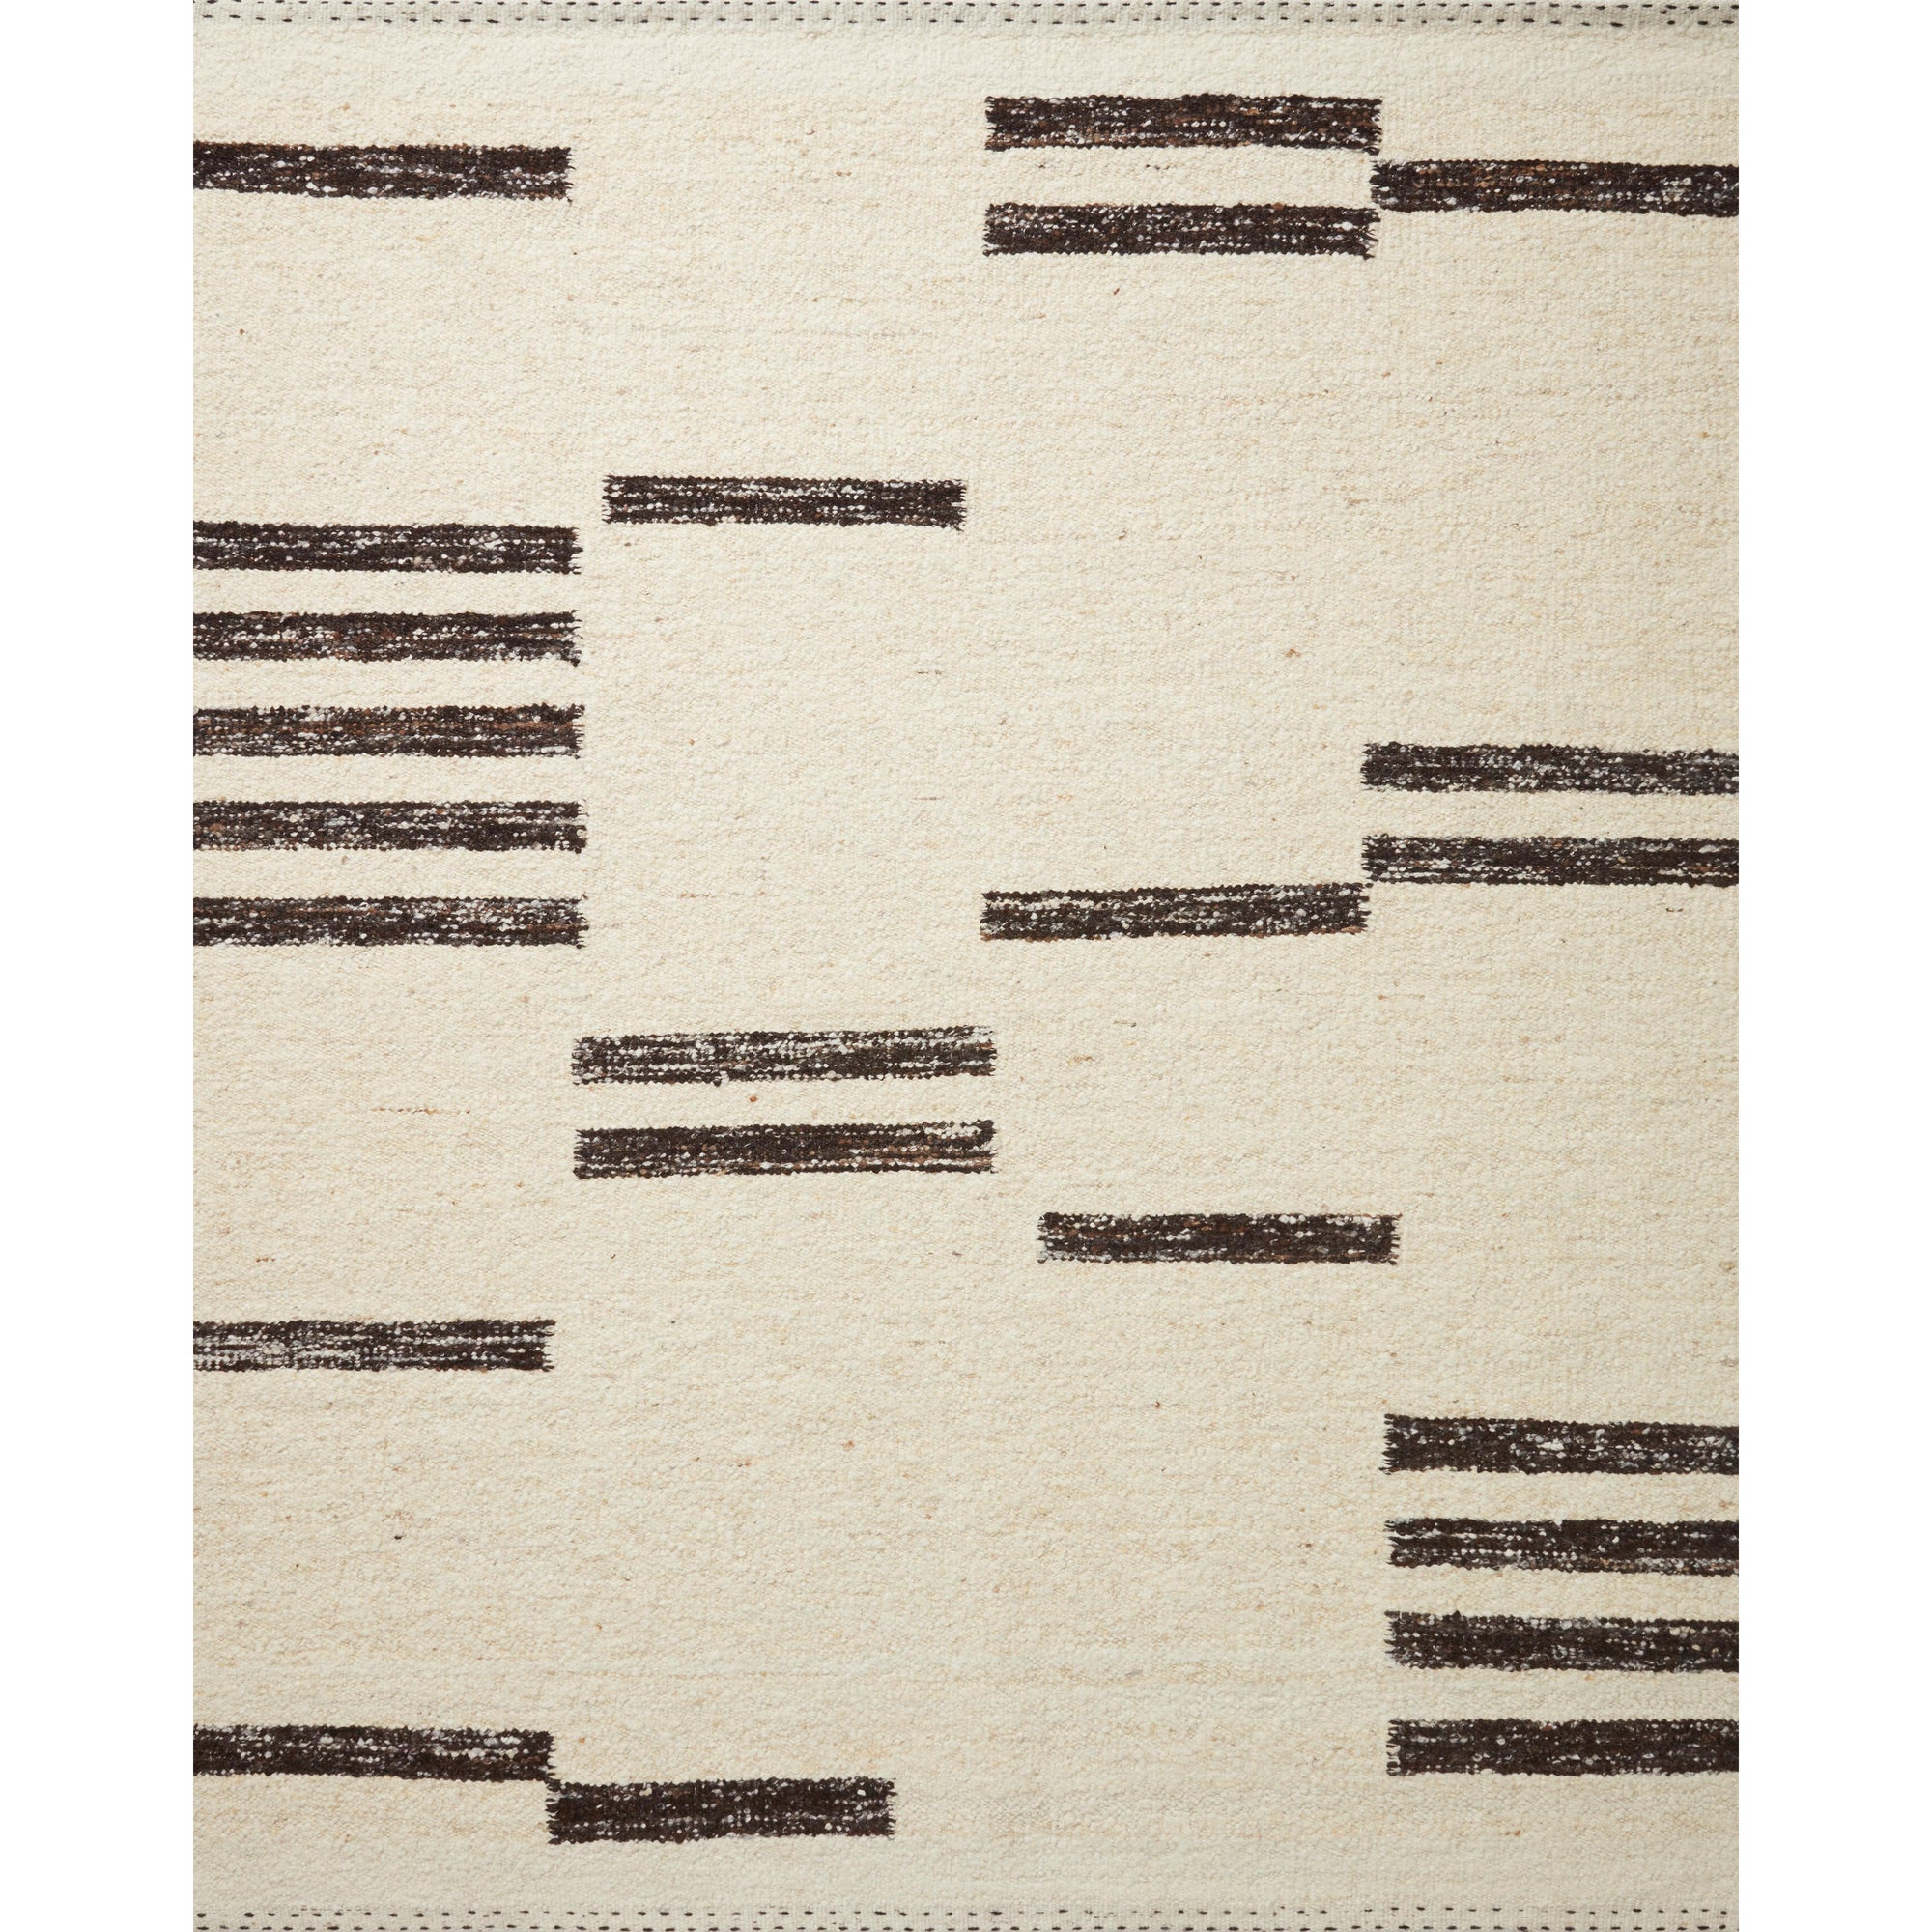 Rugs by Roo Loloi Roman Natural Bark Area Rug in size 18" x 18" Sample